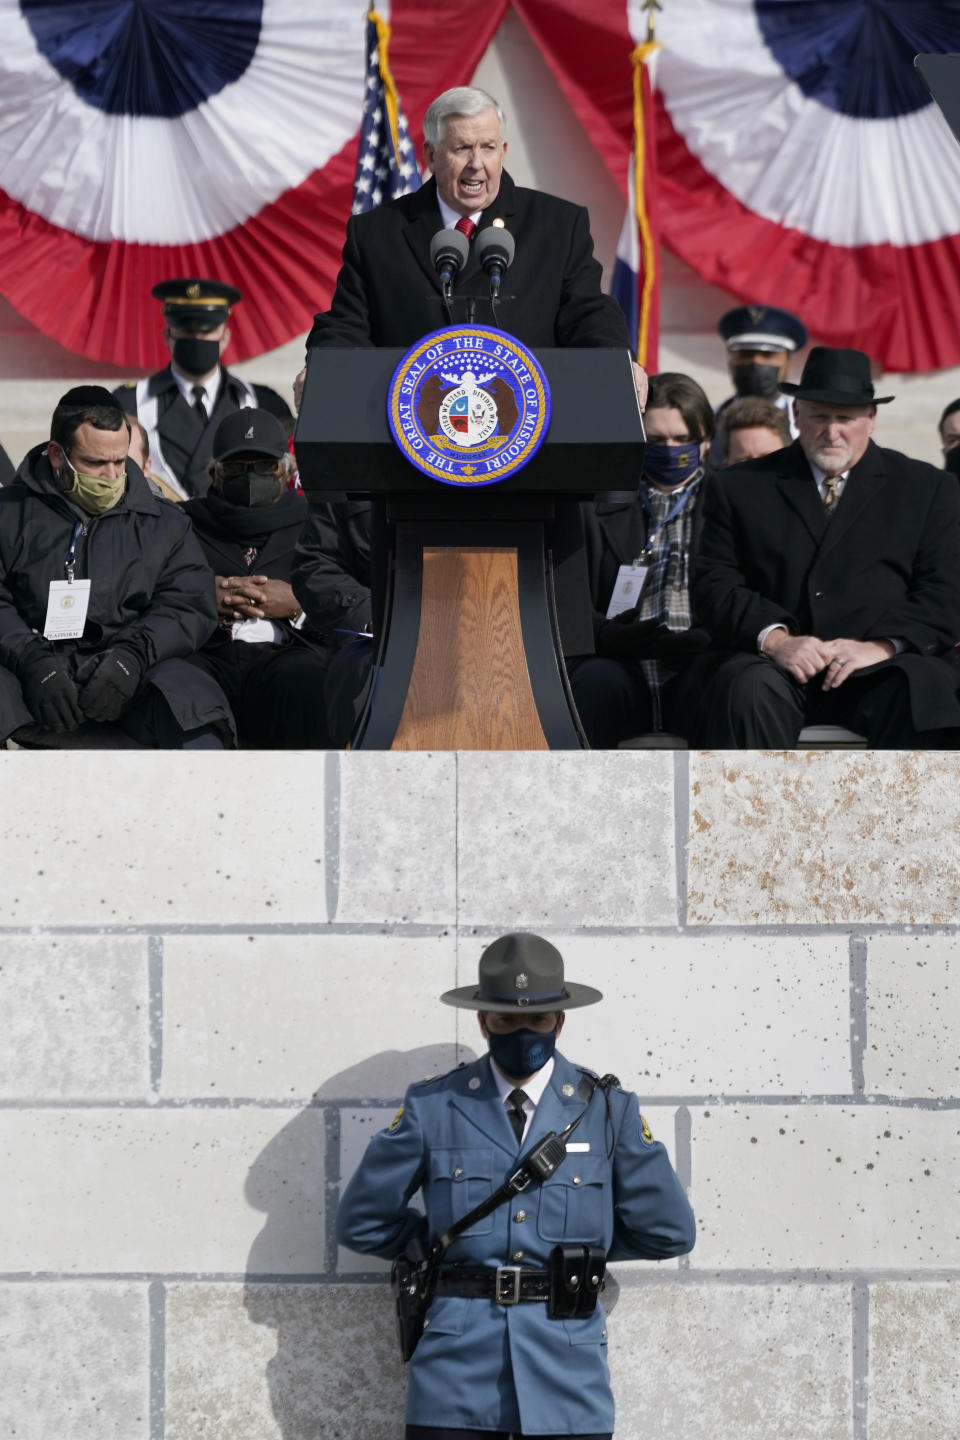 Missouri Gov. Mike Parson delivers the inaugural address after being sworn in to his first full term as governor as a member of the Missouri Highway Patrol stands below Monday, Jan. 11, 2021, in Jefferson City, Mo. (AP Photo/Jeff Roberson)